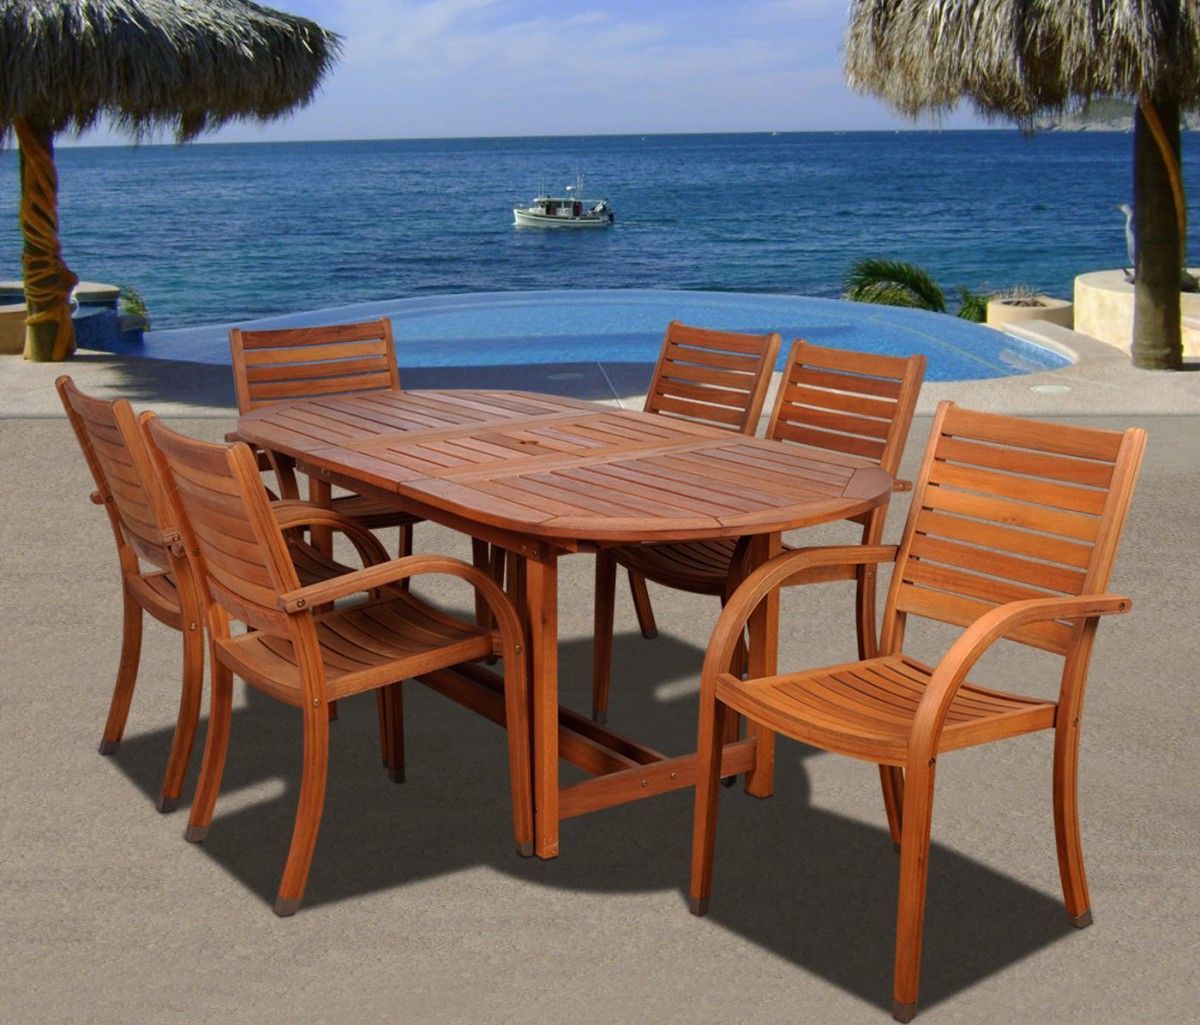 Amazonia Arizona 7 Piece Wood Outdoor Dining Set With 83" Oval Table Inside 7 Piece Large Patio Dining Sets (View 9 of 15)